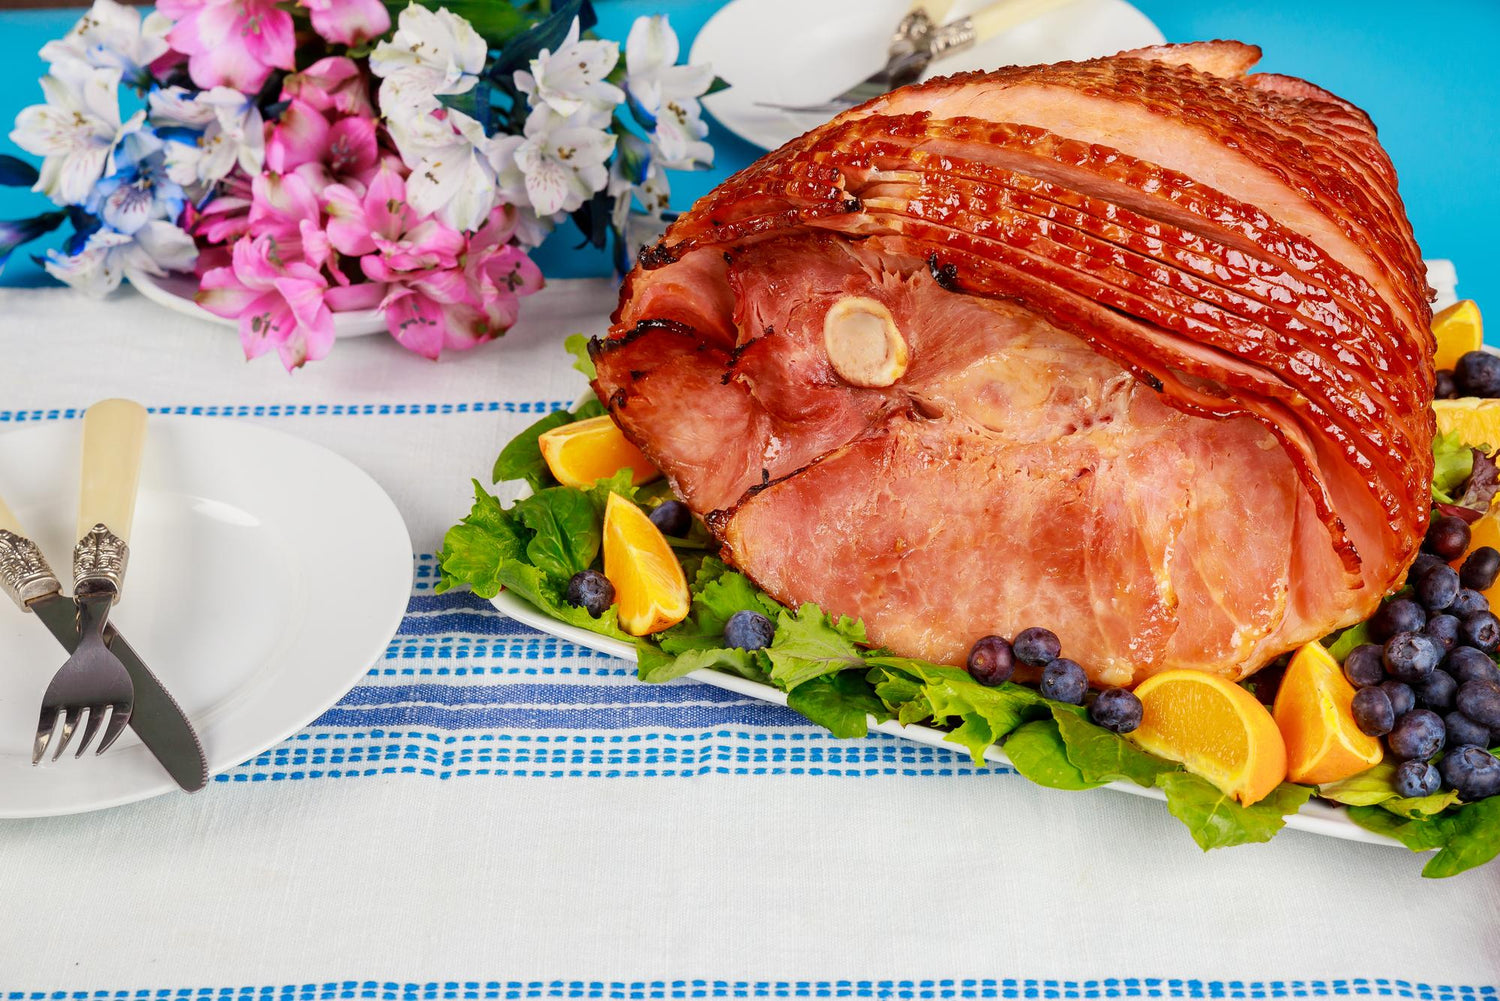 You Need To Try This Honey Glazed Ham This Thanksgiving - howcasing a ham for Thanksgiving with glaze ingredients